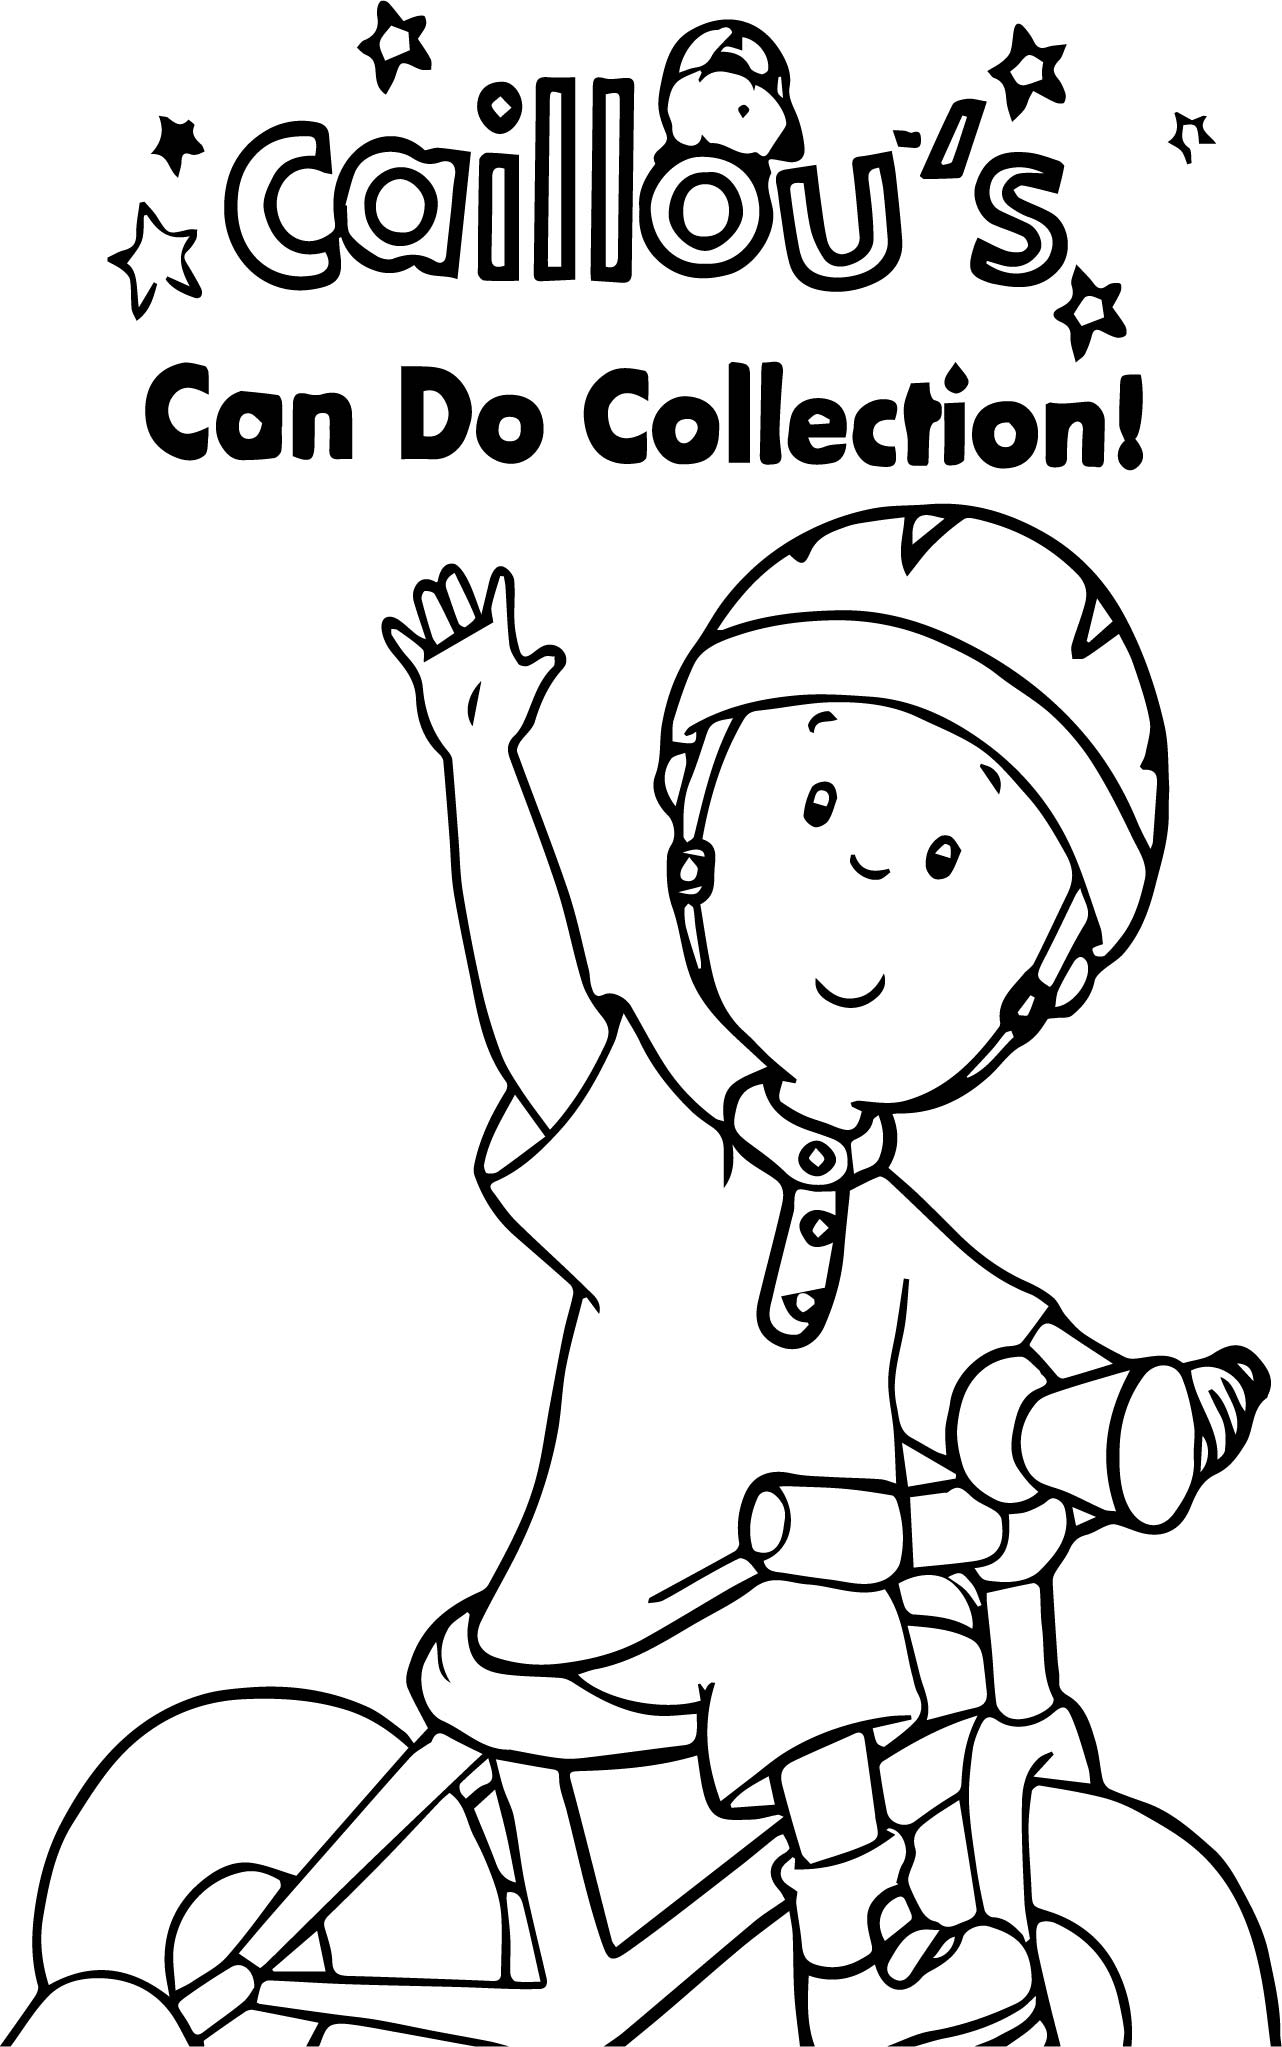 Caillou Bicycle Collection Coloring Page